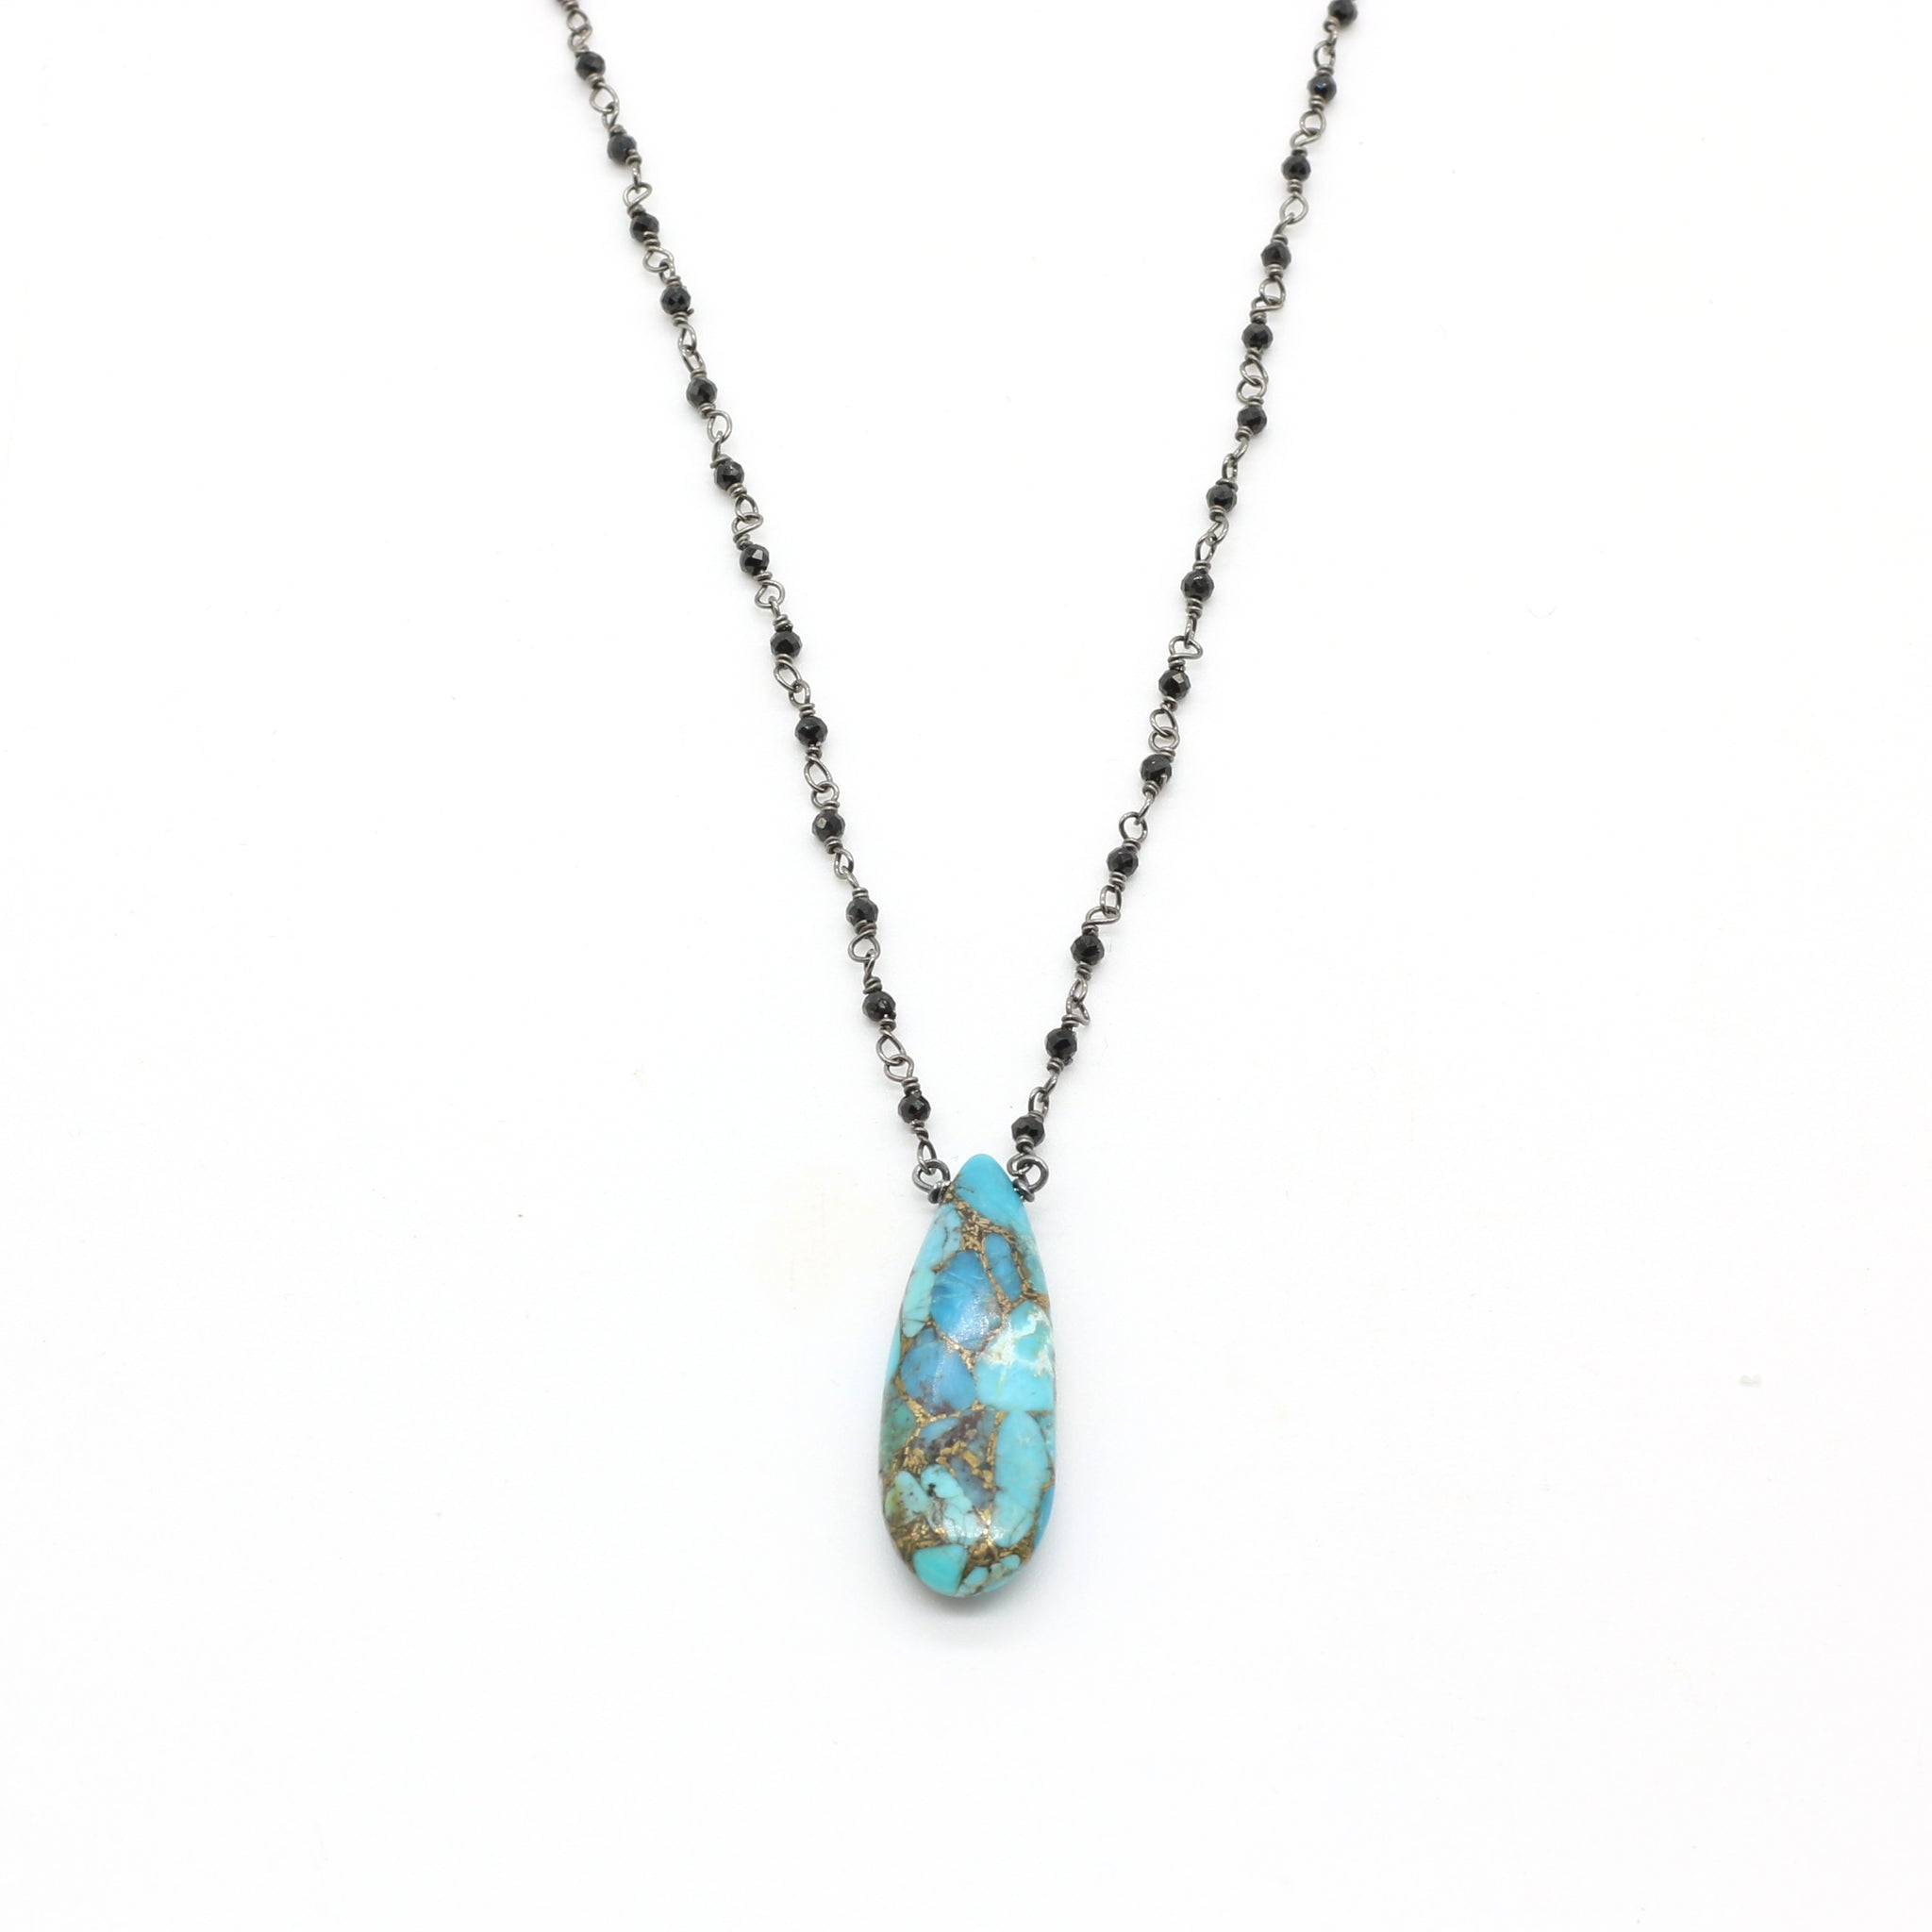 The Moment Necklace – Songlines By Jewel